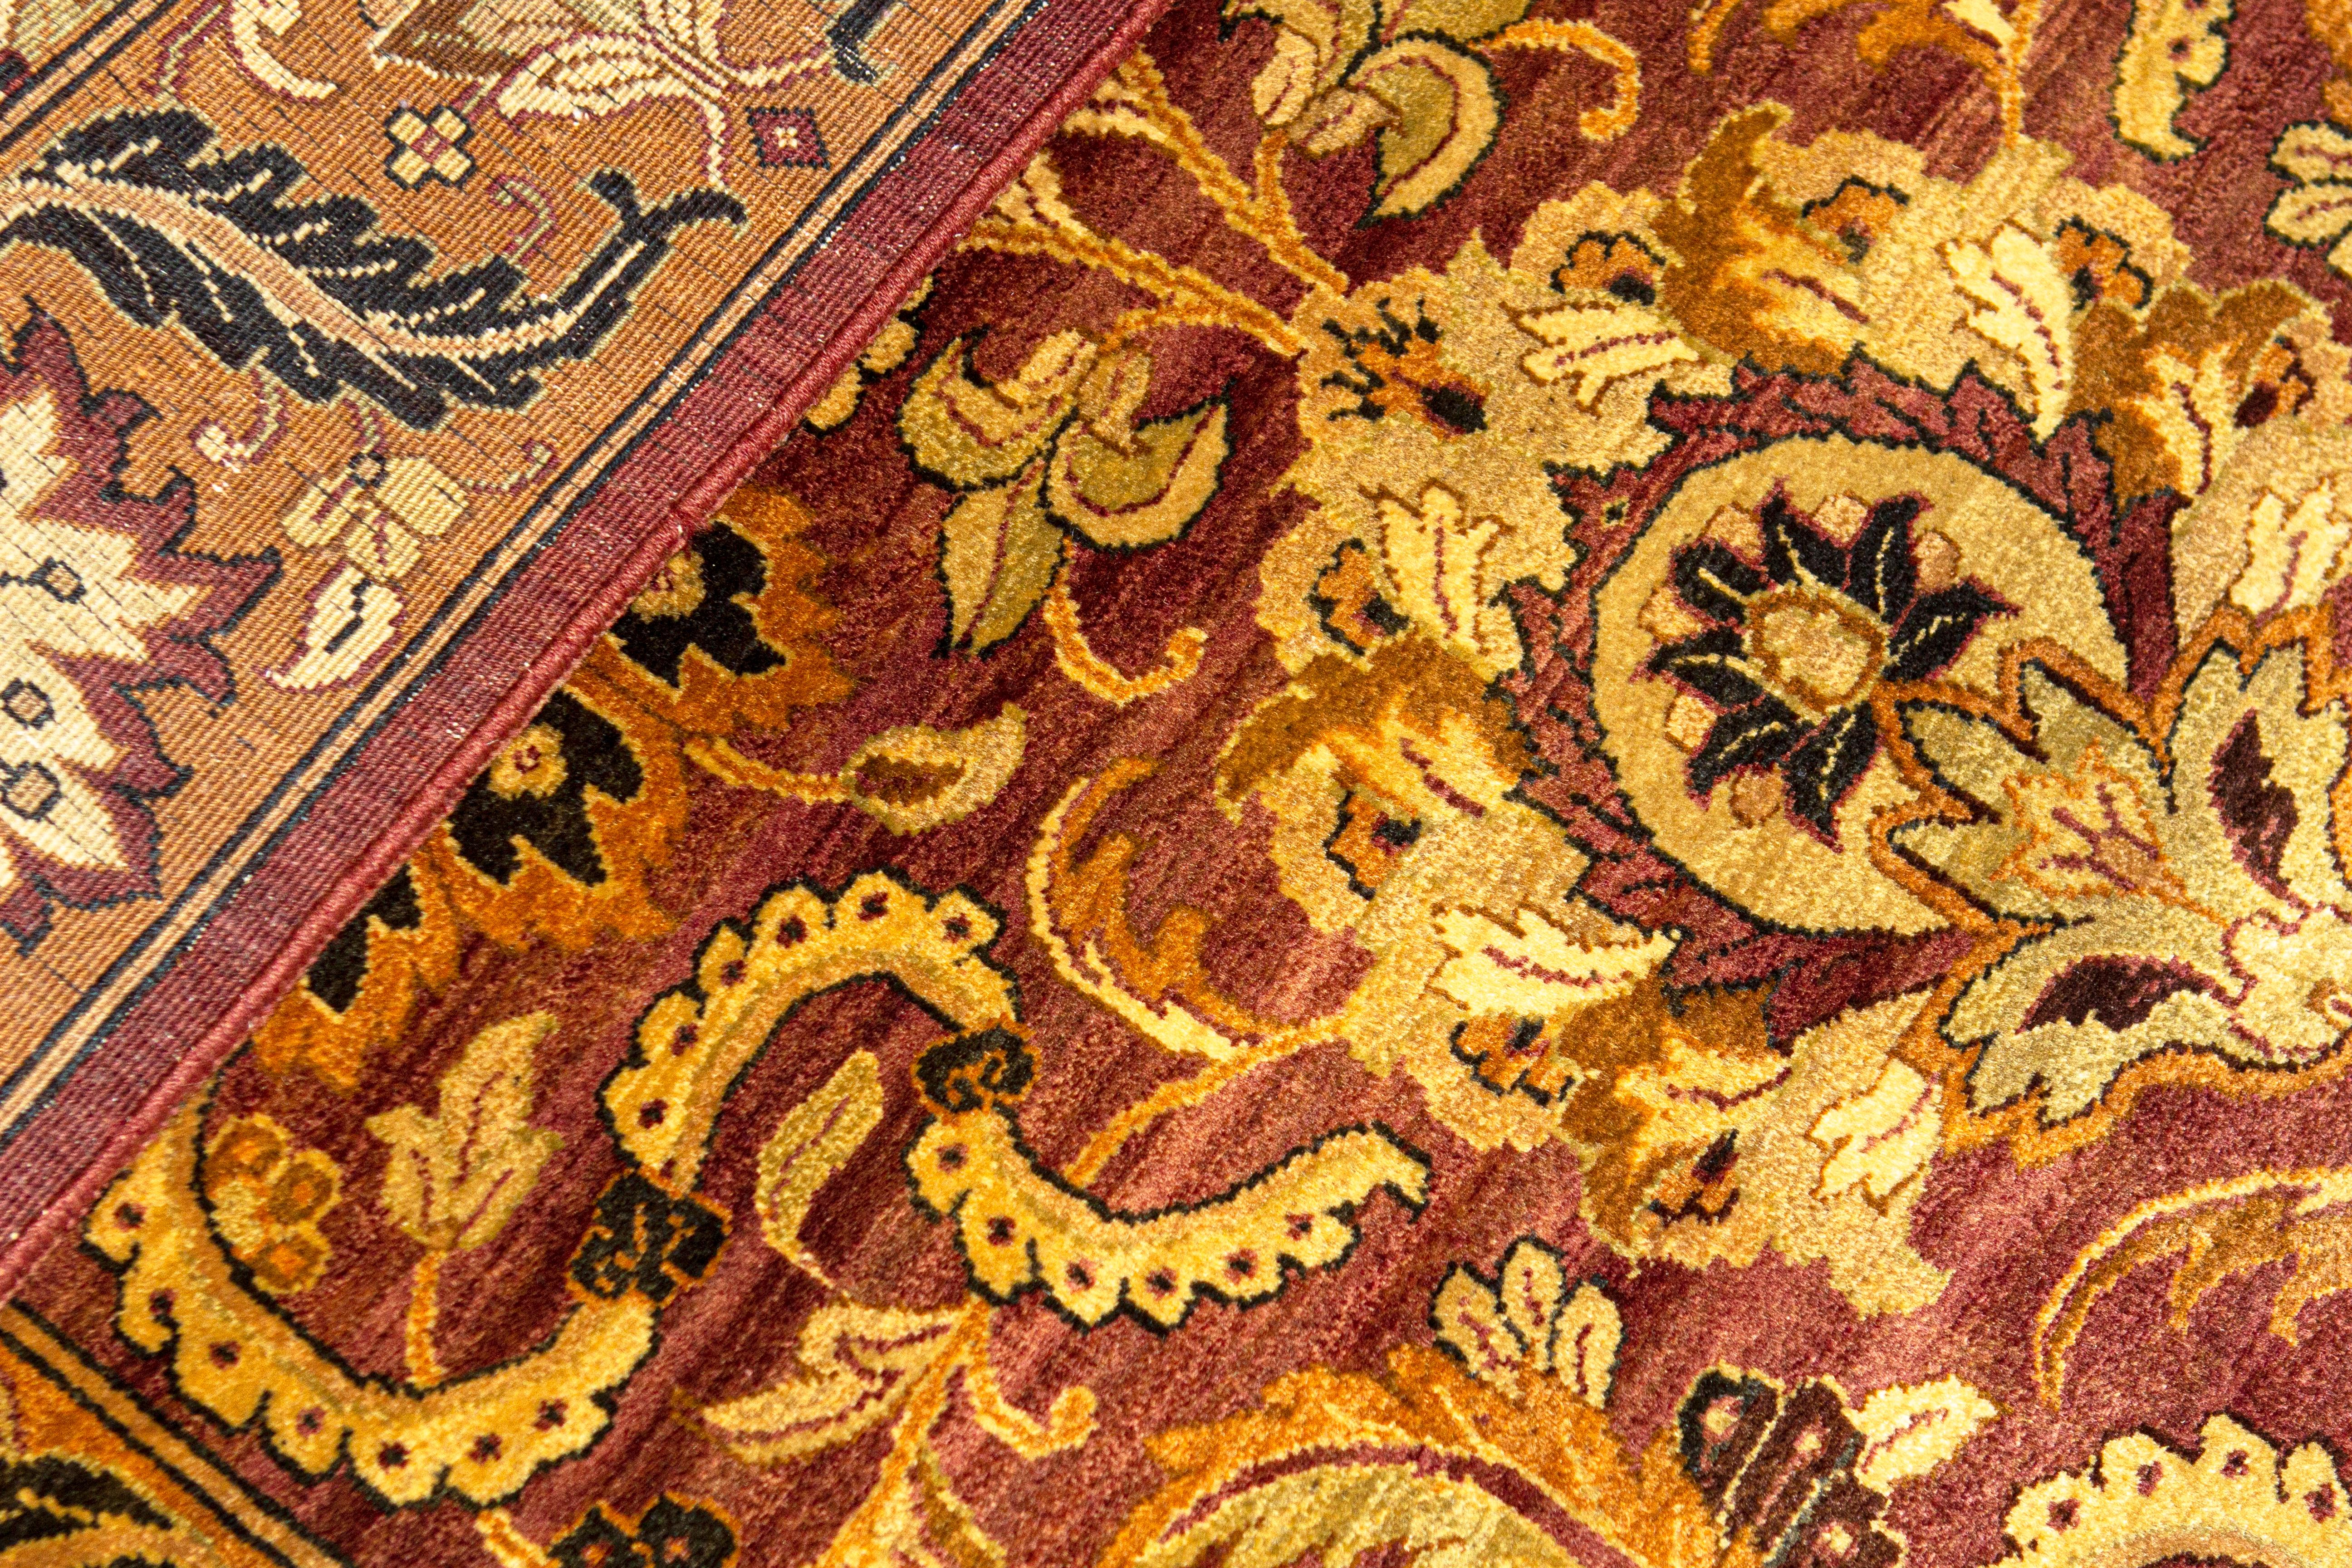 The authentic styles of traditional Oriental masterpieces are recreated here, reflecting an ageless beauty in the presentation of these fine traditional hand woven rugs. Each piece is unique in representing carpets of a bygone age. The wool is from